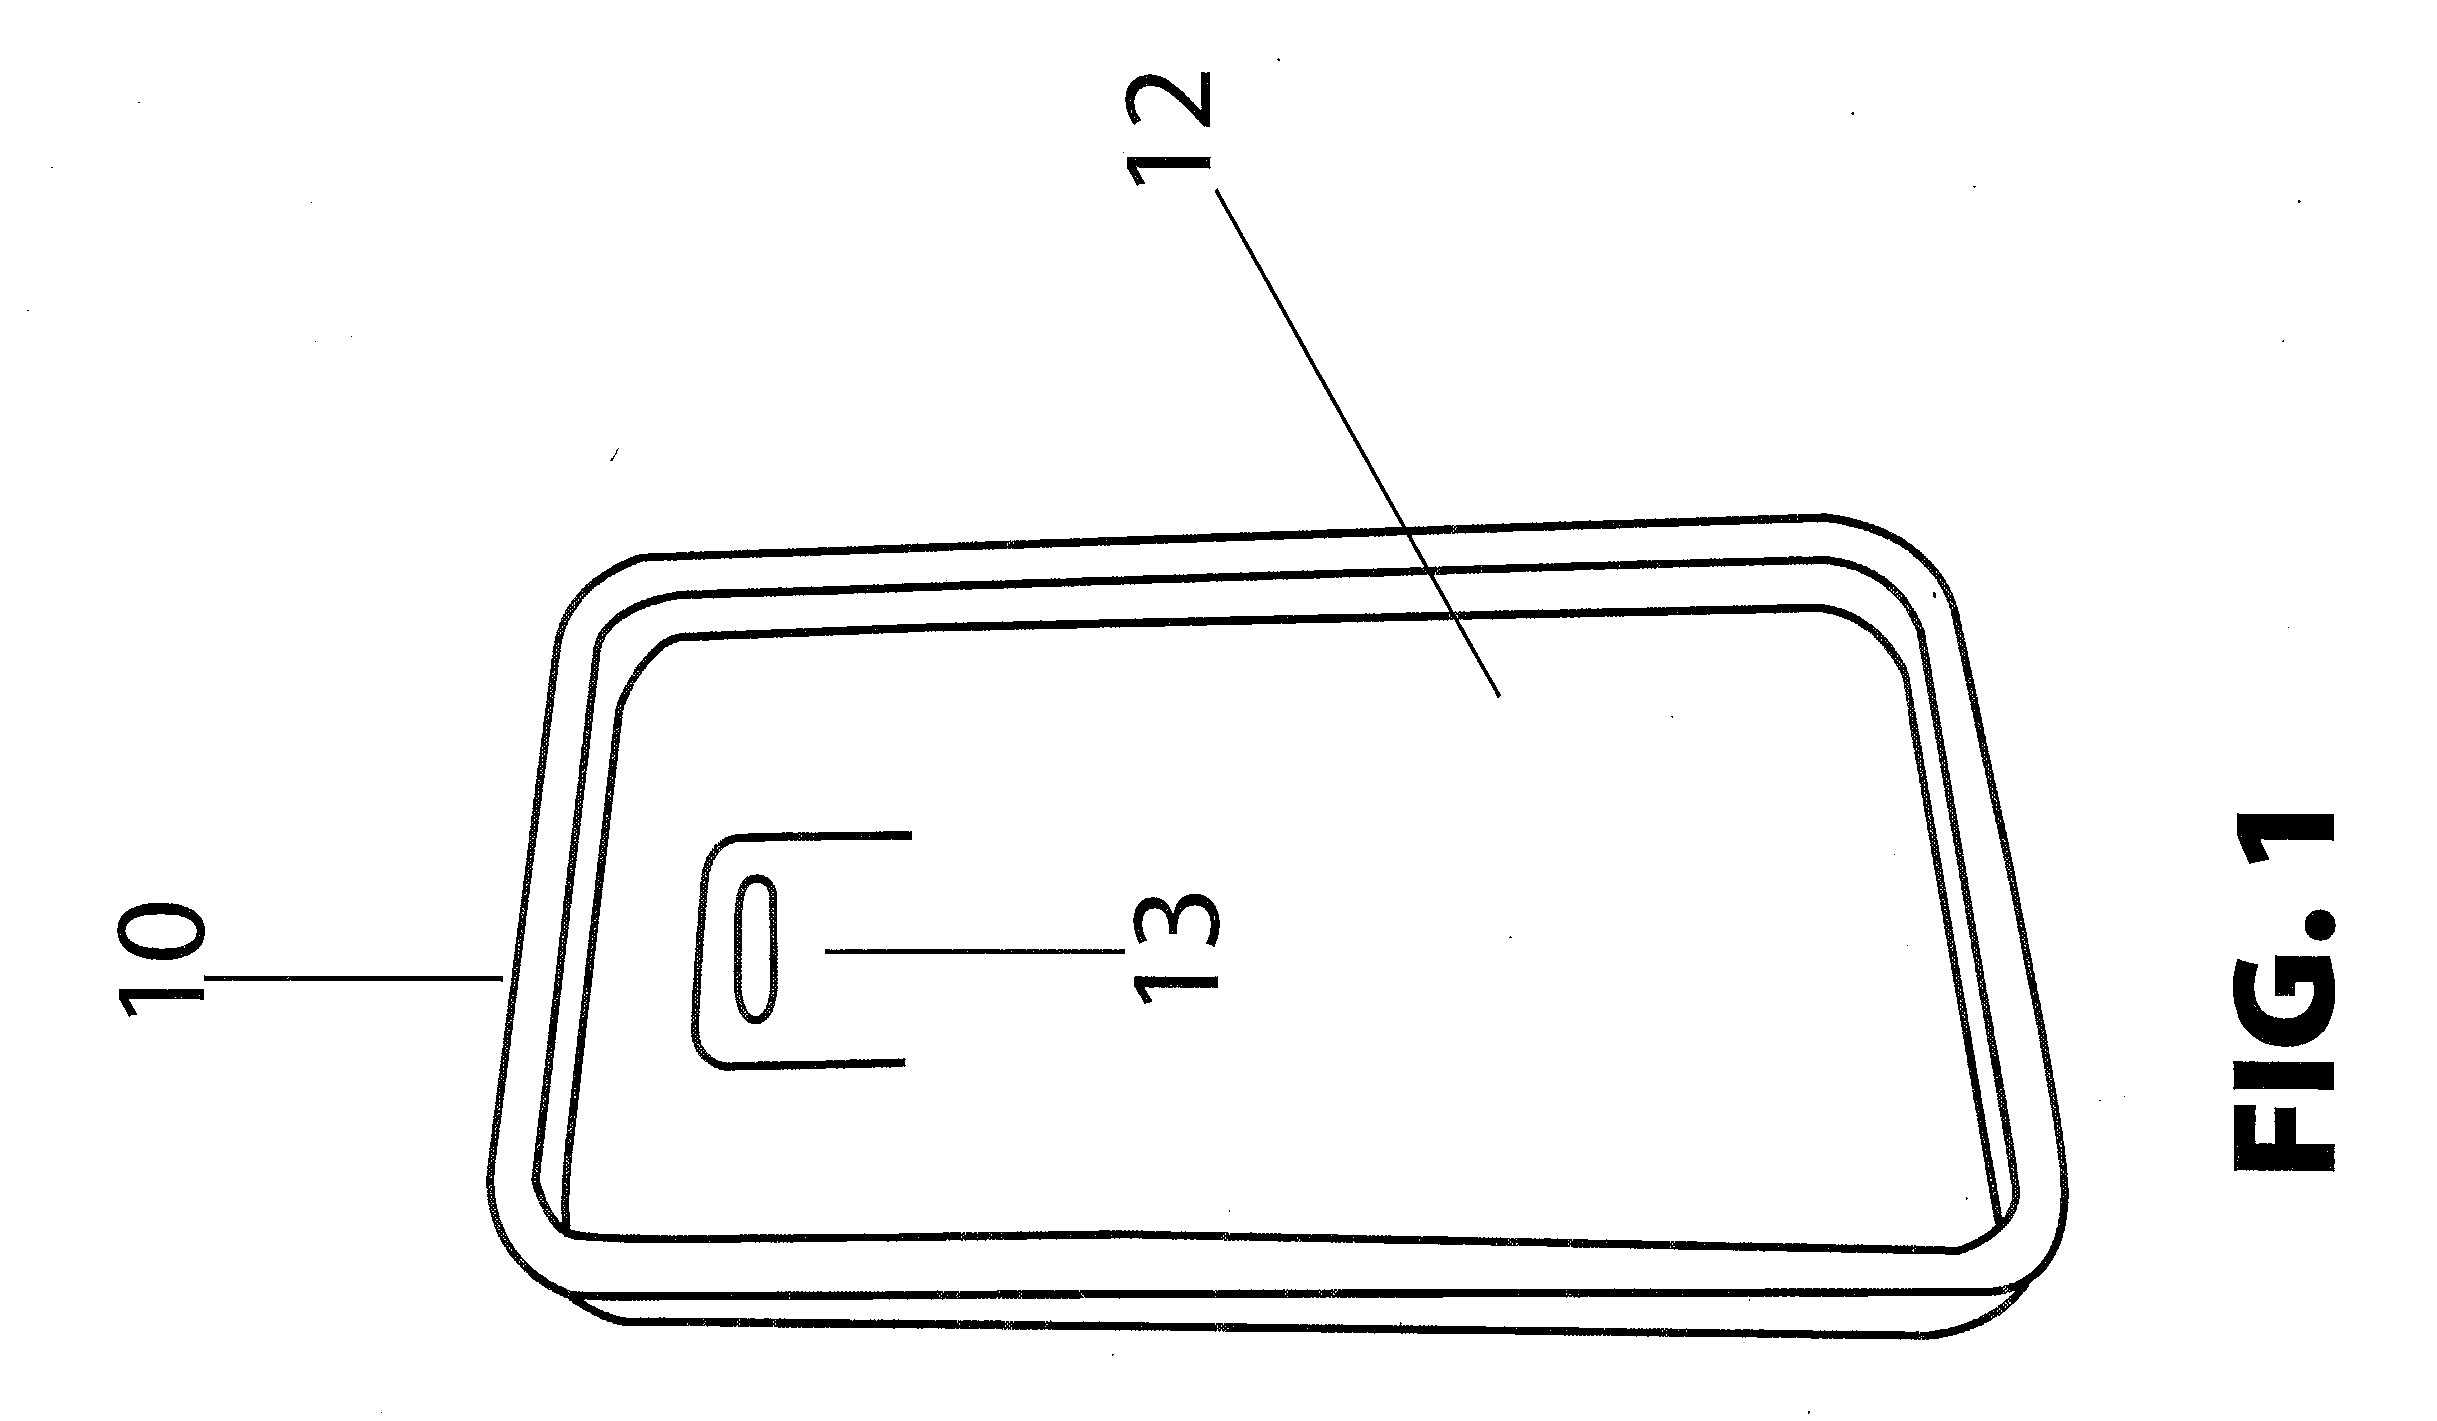 Apparatus for carrying hand-held wireless electronic device